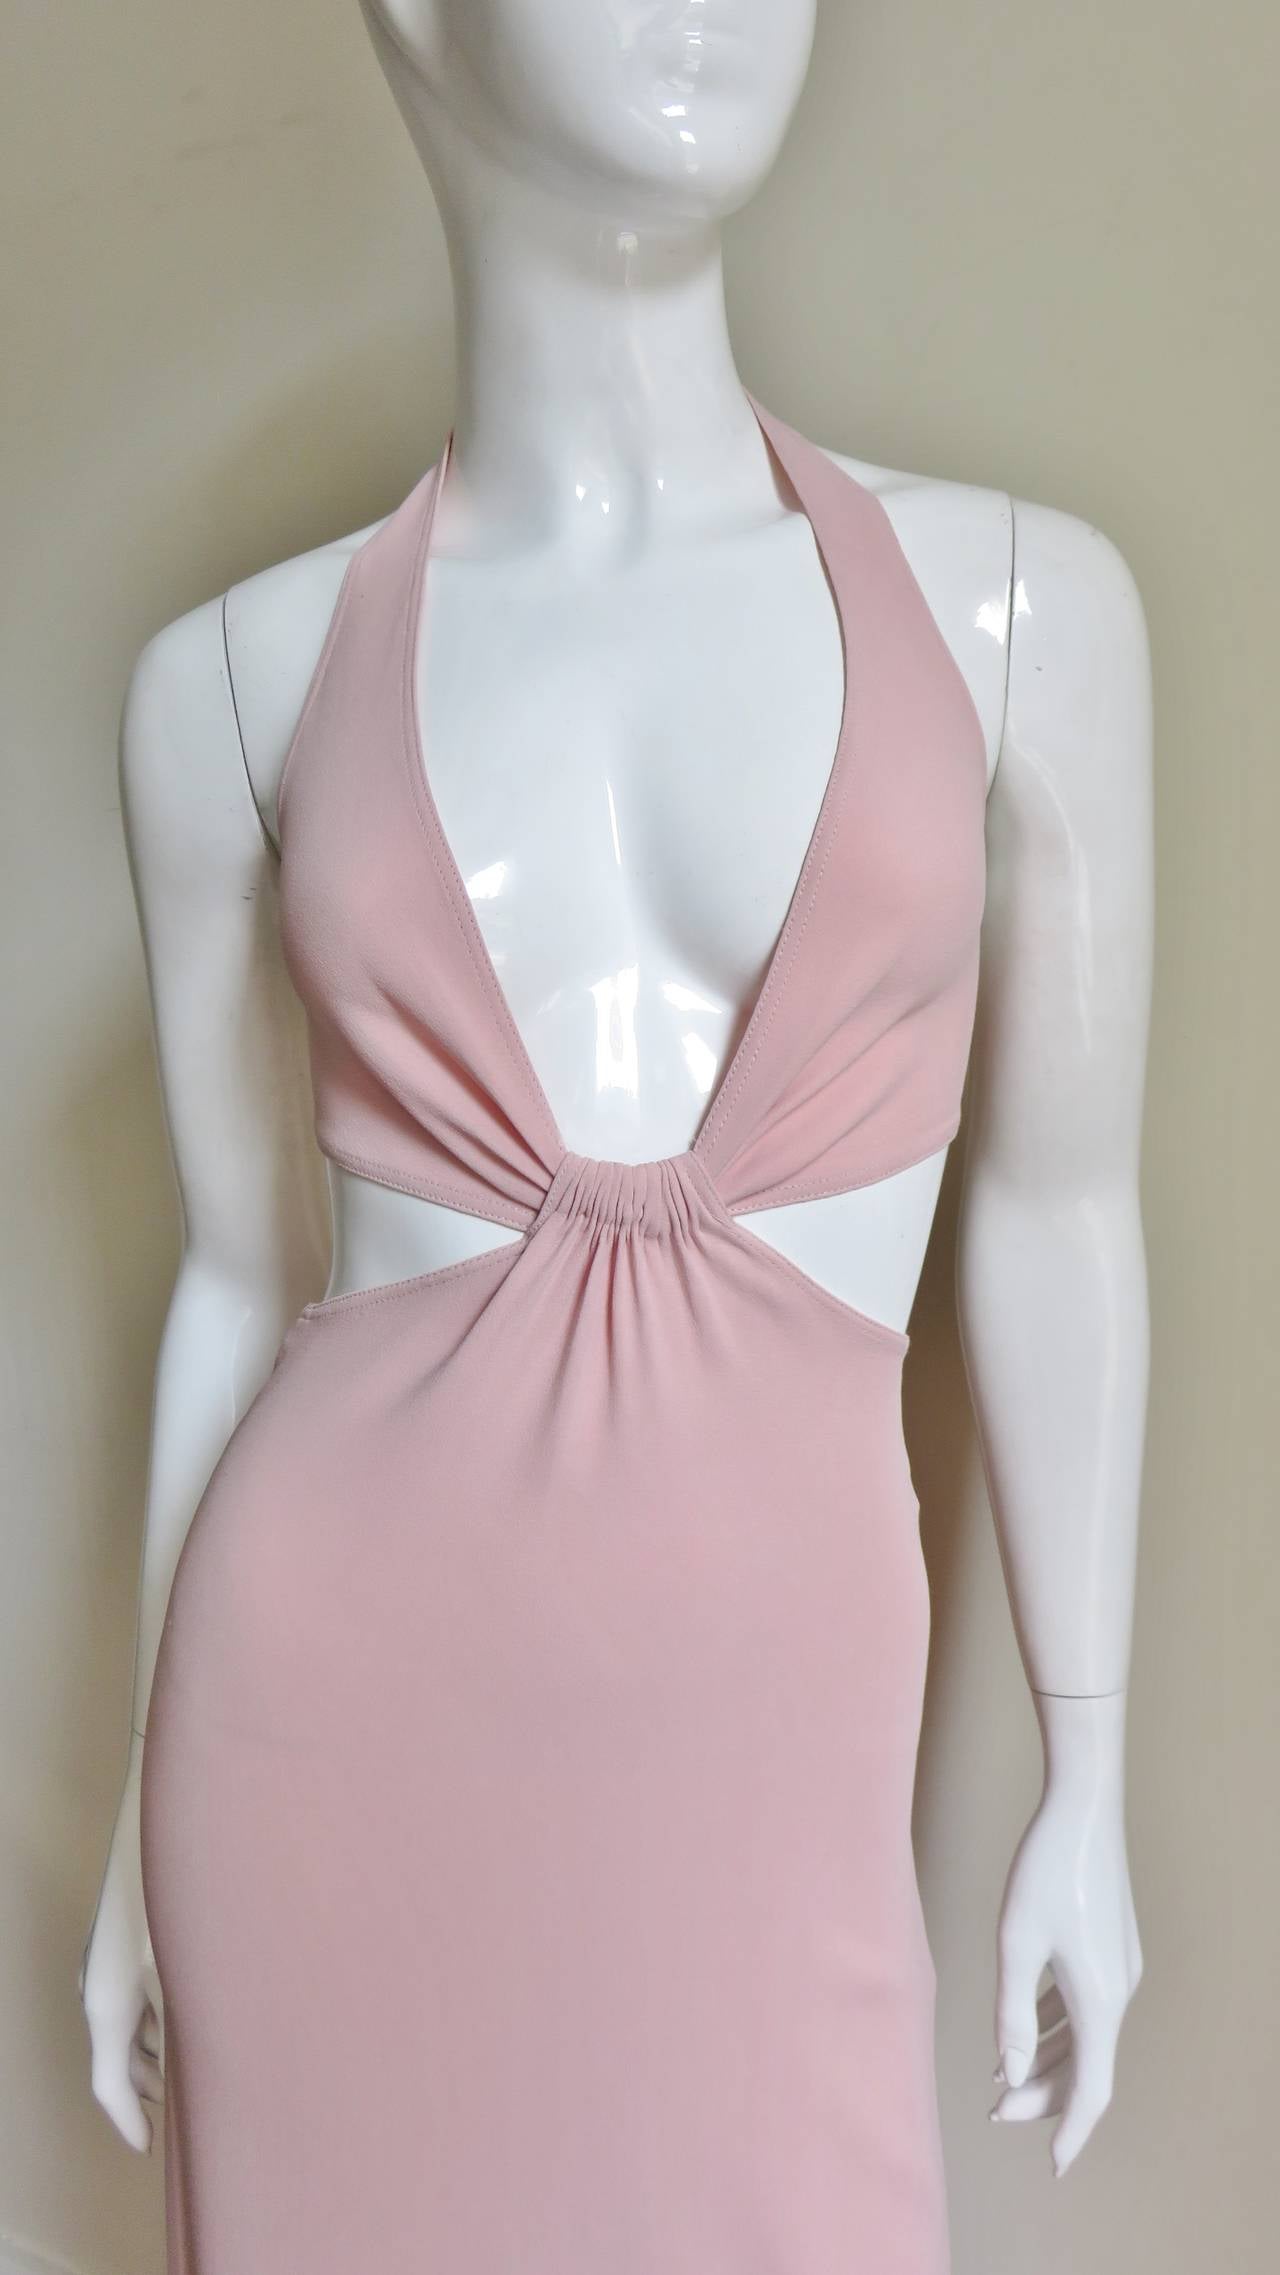 A fabulous blush pink silk knit dress from Celine. It a halter style top with a  plunging front and bare in the back with the exception of a strap across the center closing with a metal clasp. The skirt forms from the gathered center front of the